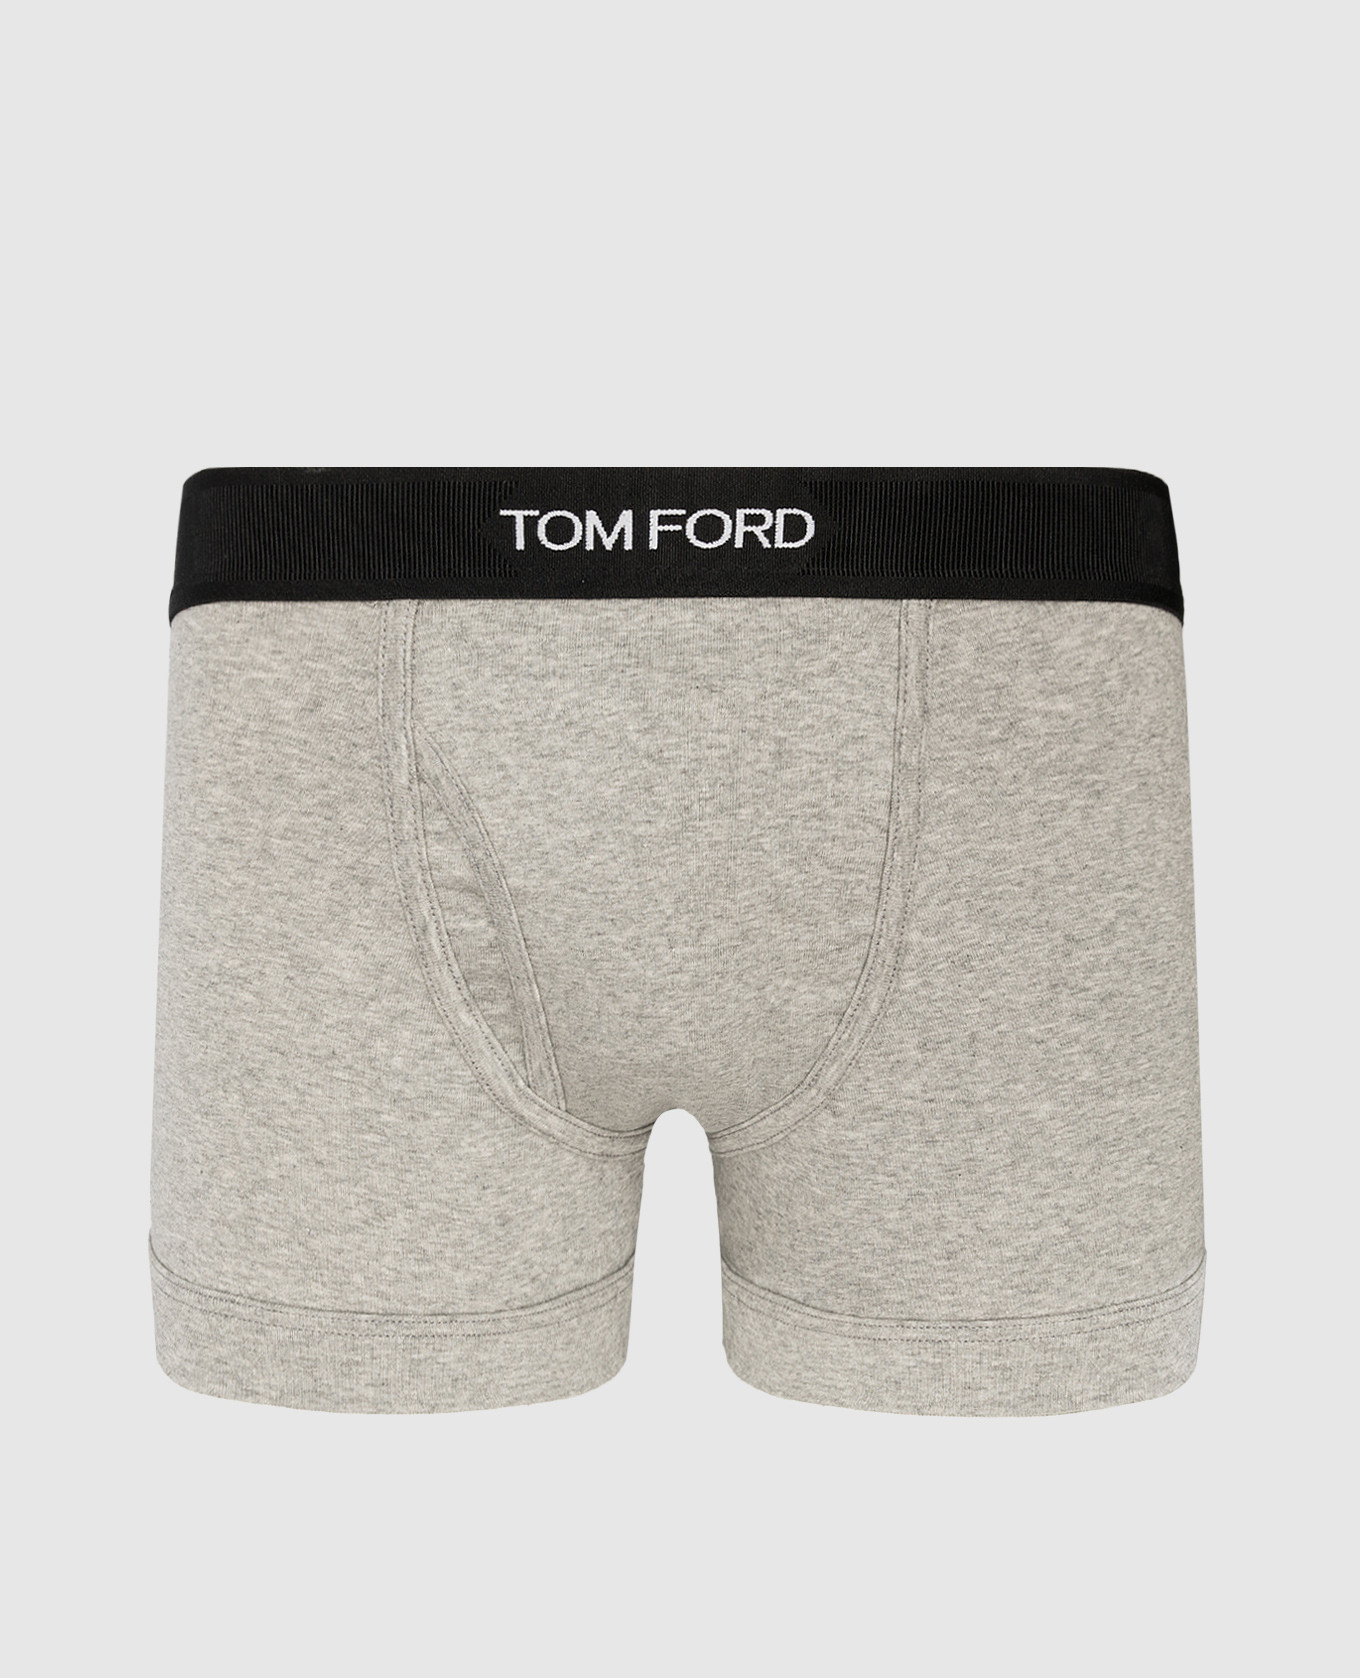 Set of gray boxer briefs with logo